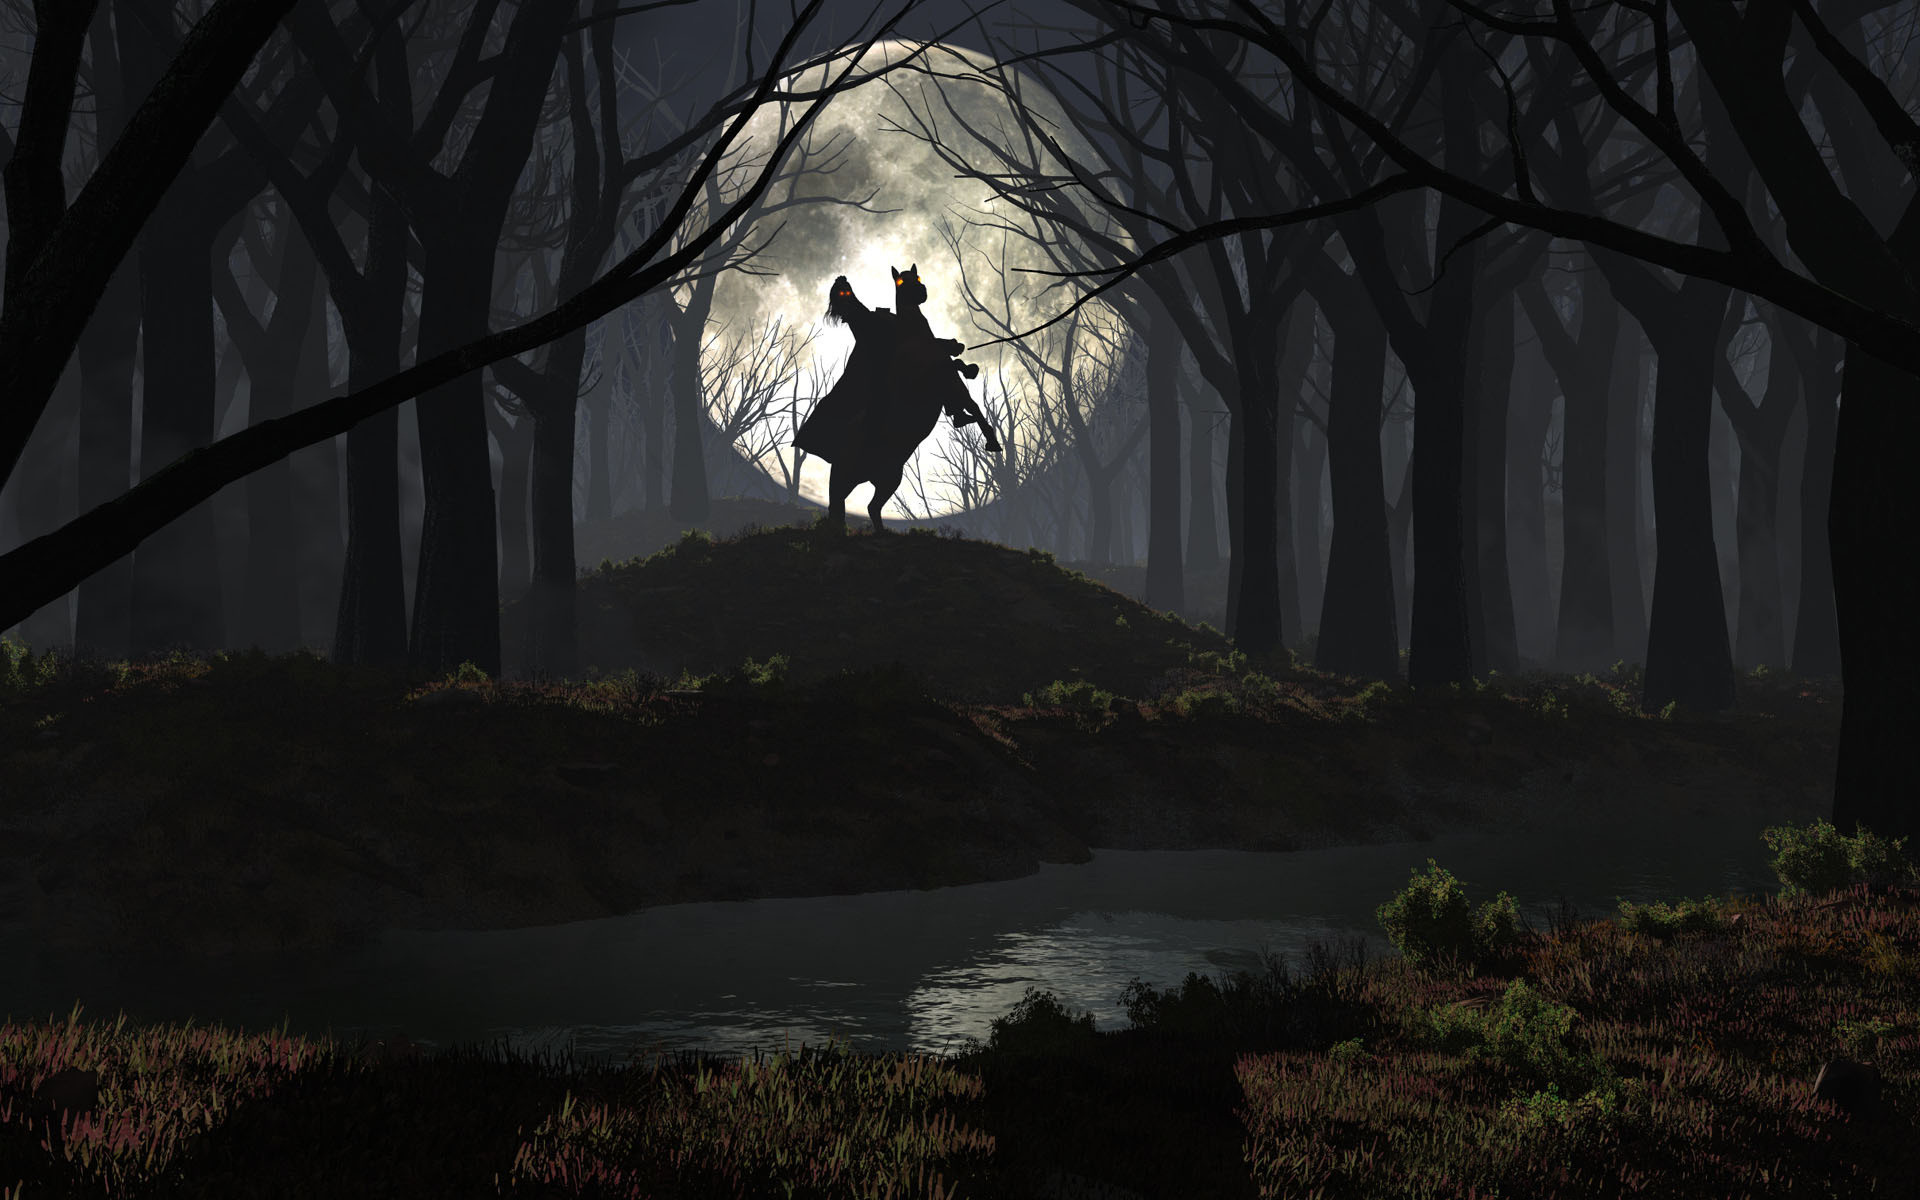 Rider in the spooky forest wallpaper, Rider in the spooky forest Fantasy HD  desktop wallpaper